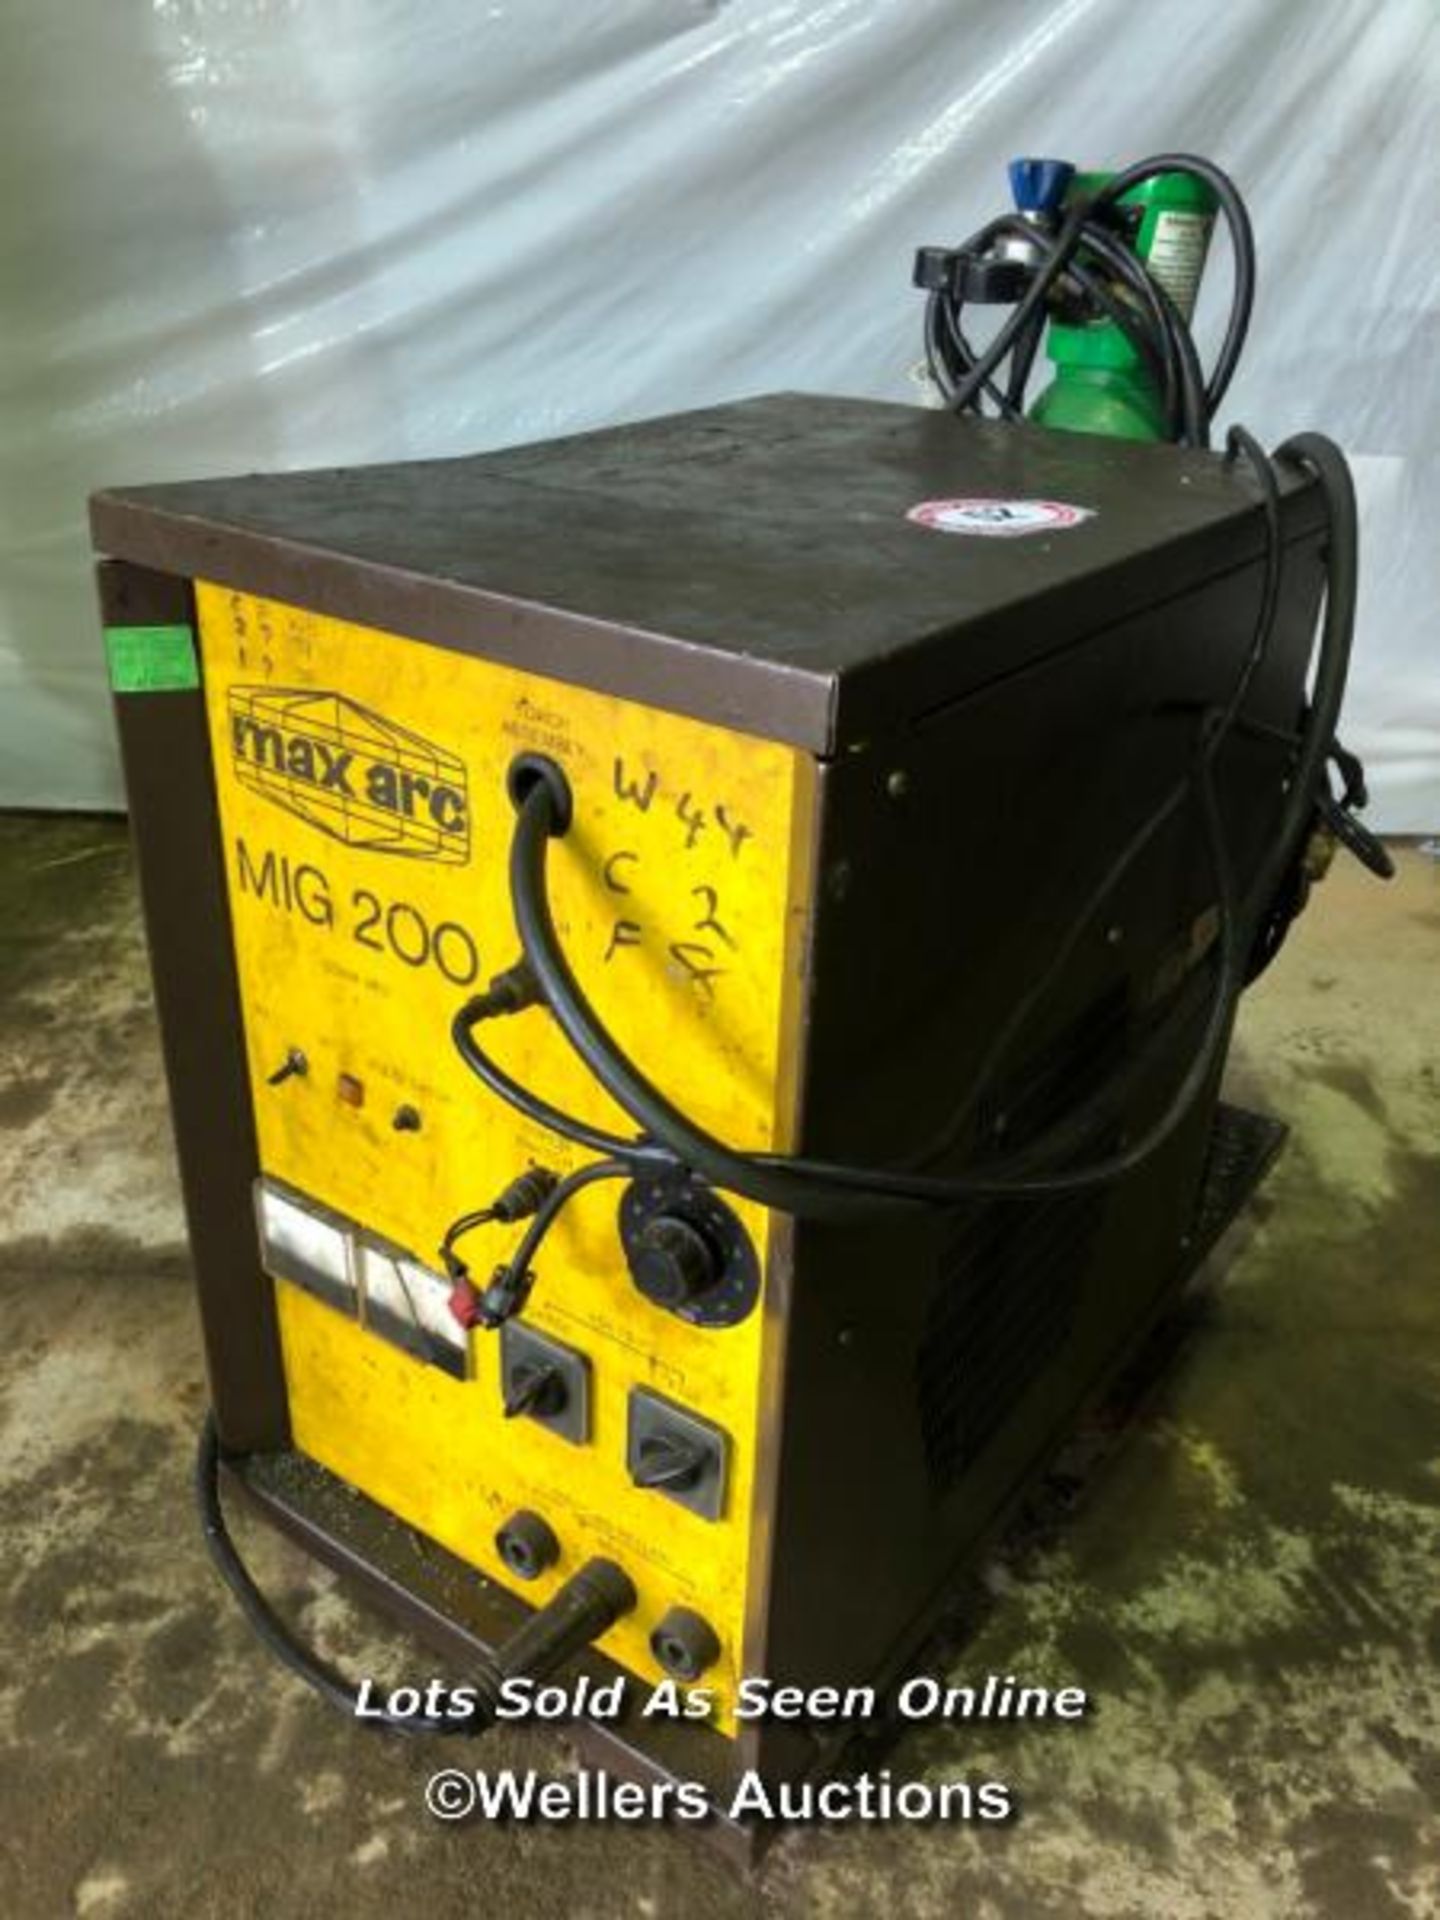 MAX ARC MIG 200 3 PHASE WELDER, CONTENTS INCL. WIRE, FACE SHIELD, AND GAS BOTTLE, IN WORKING ORDER